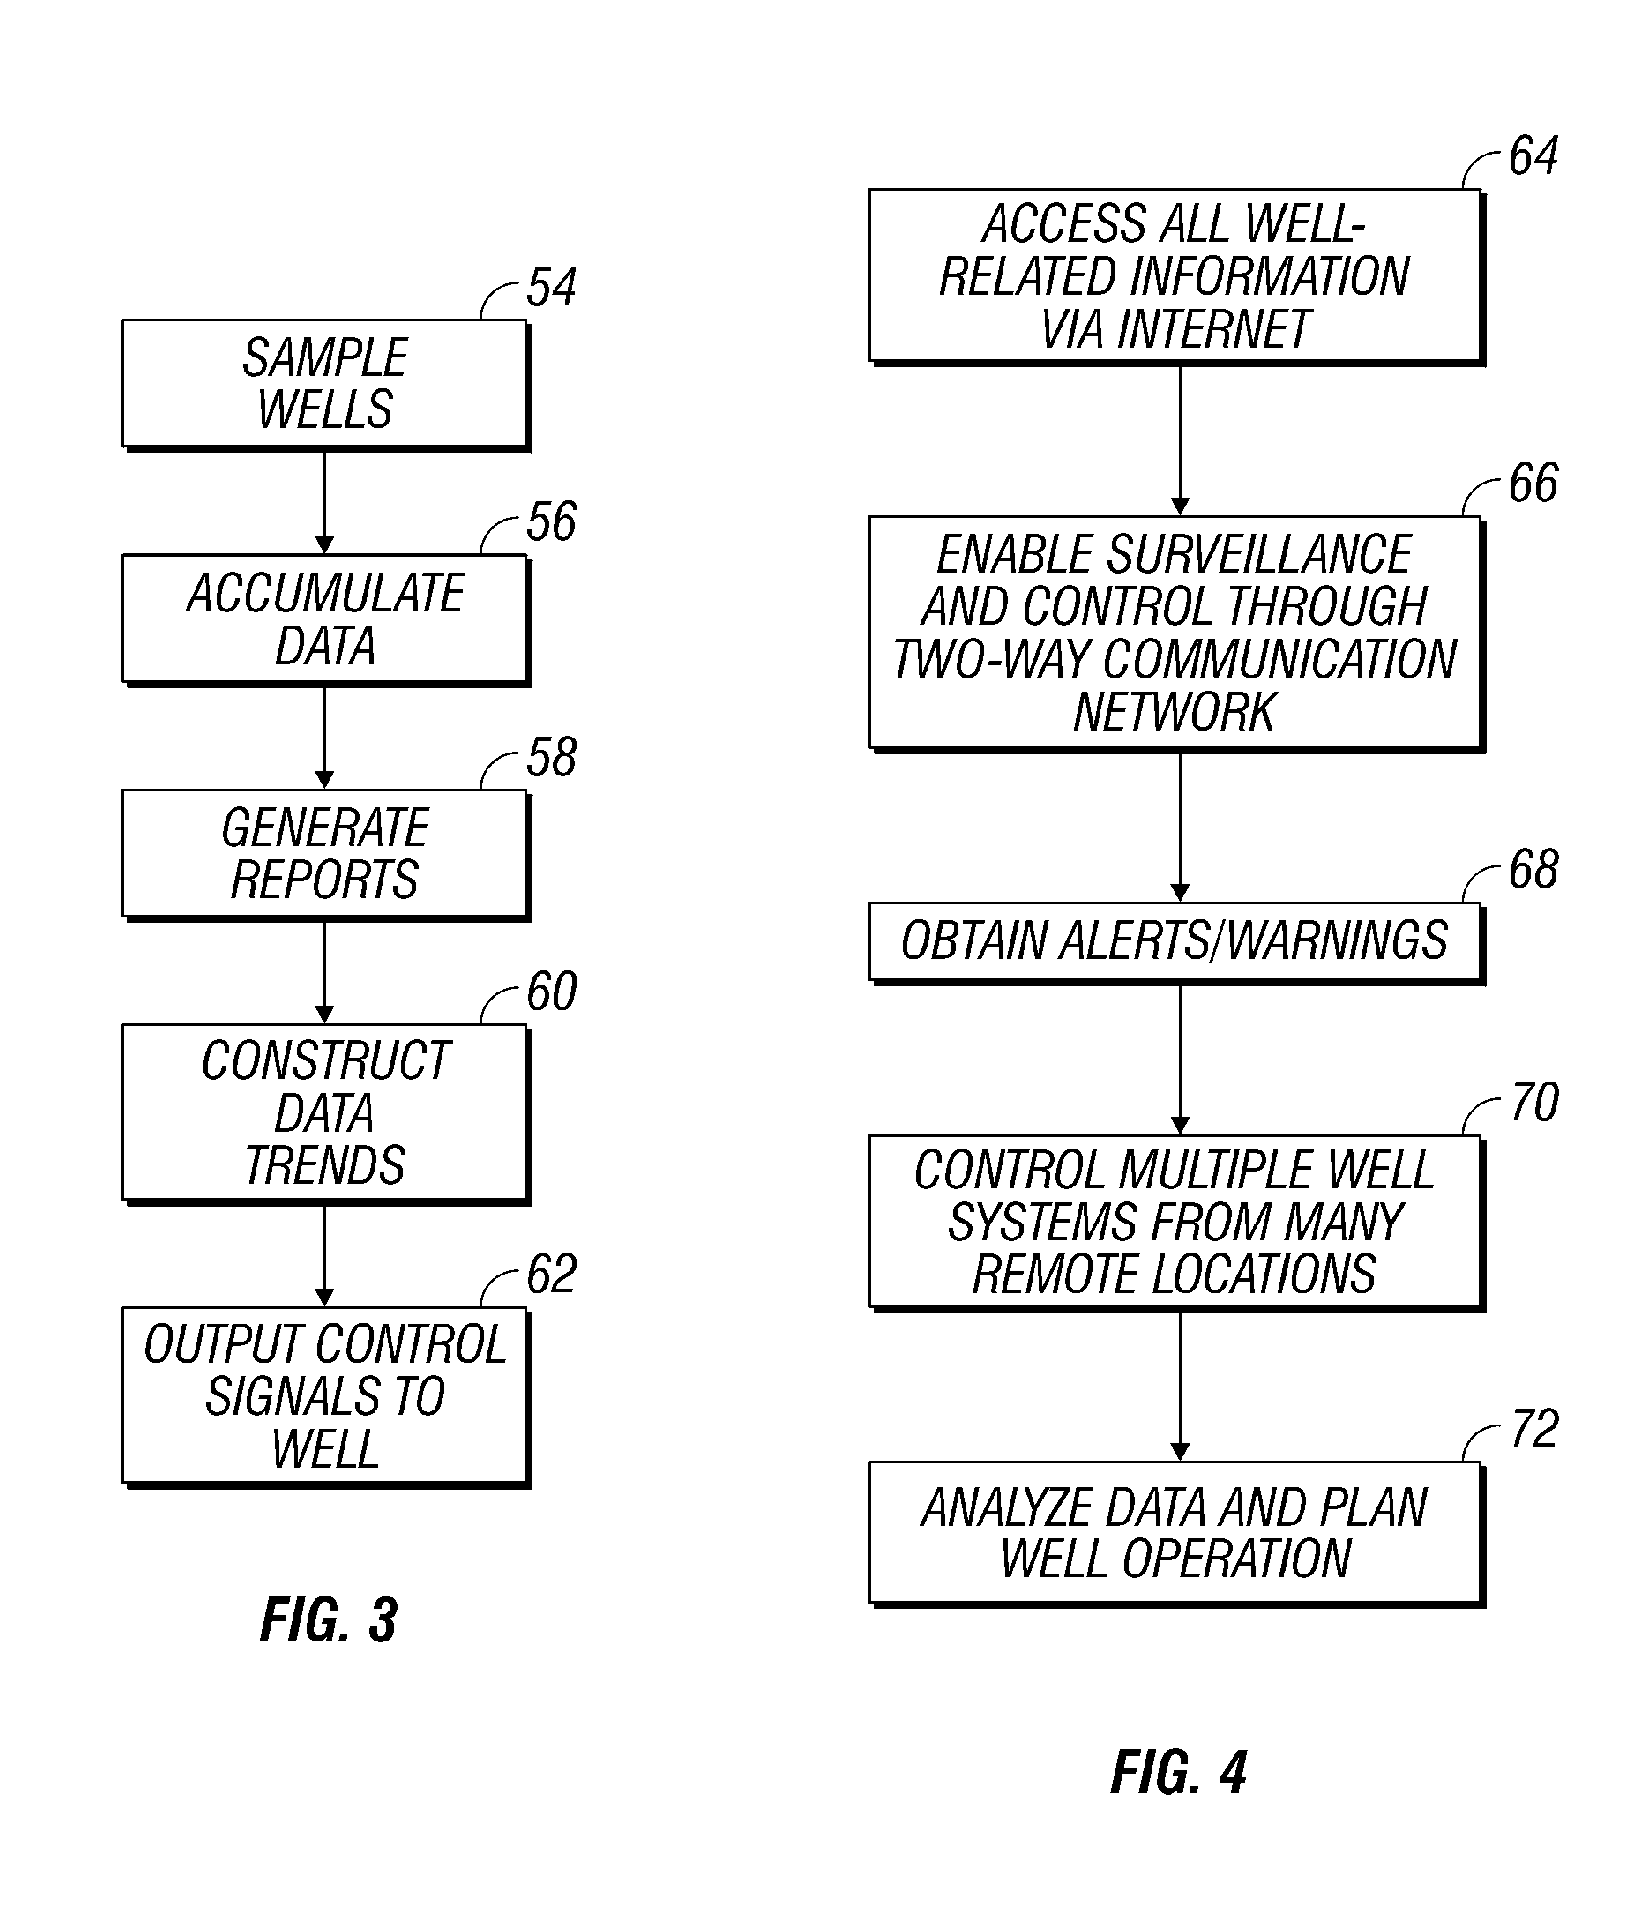 System and Method for Remote Real-Time Surveillance and Control of Pumped Wells